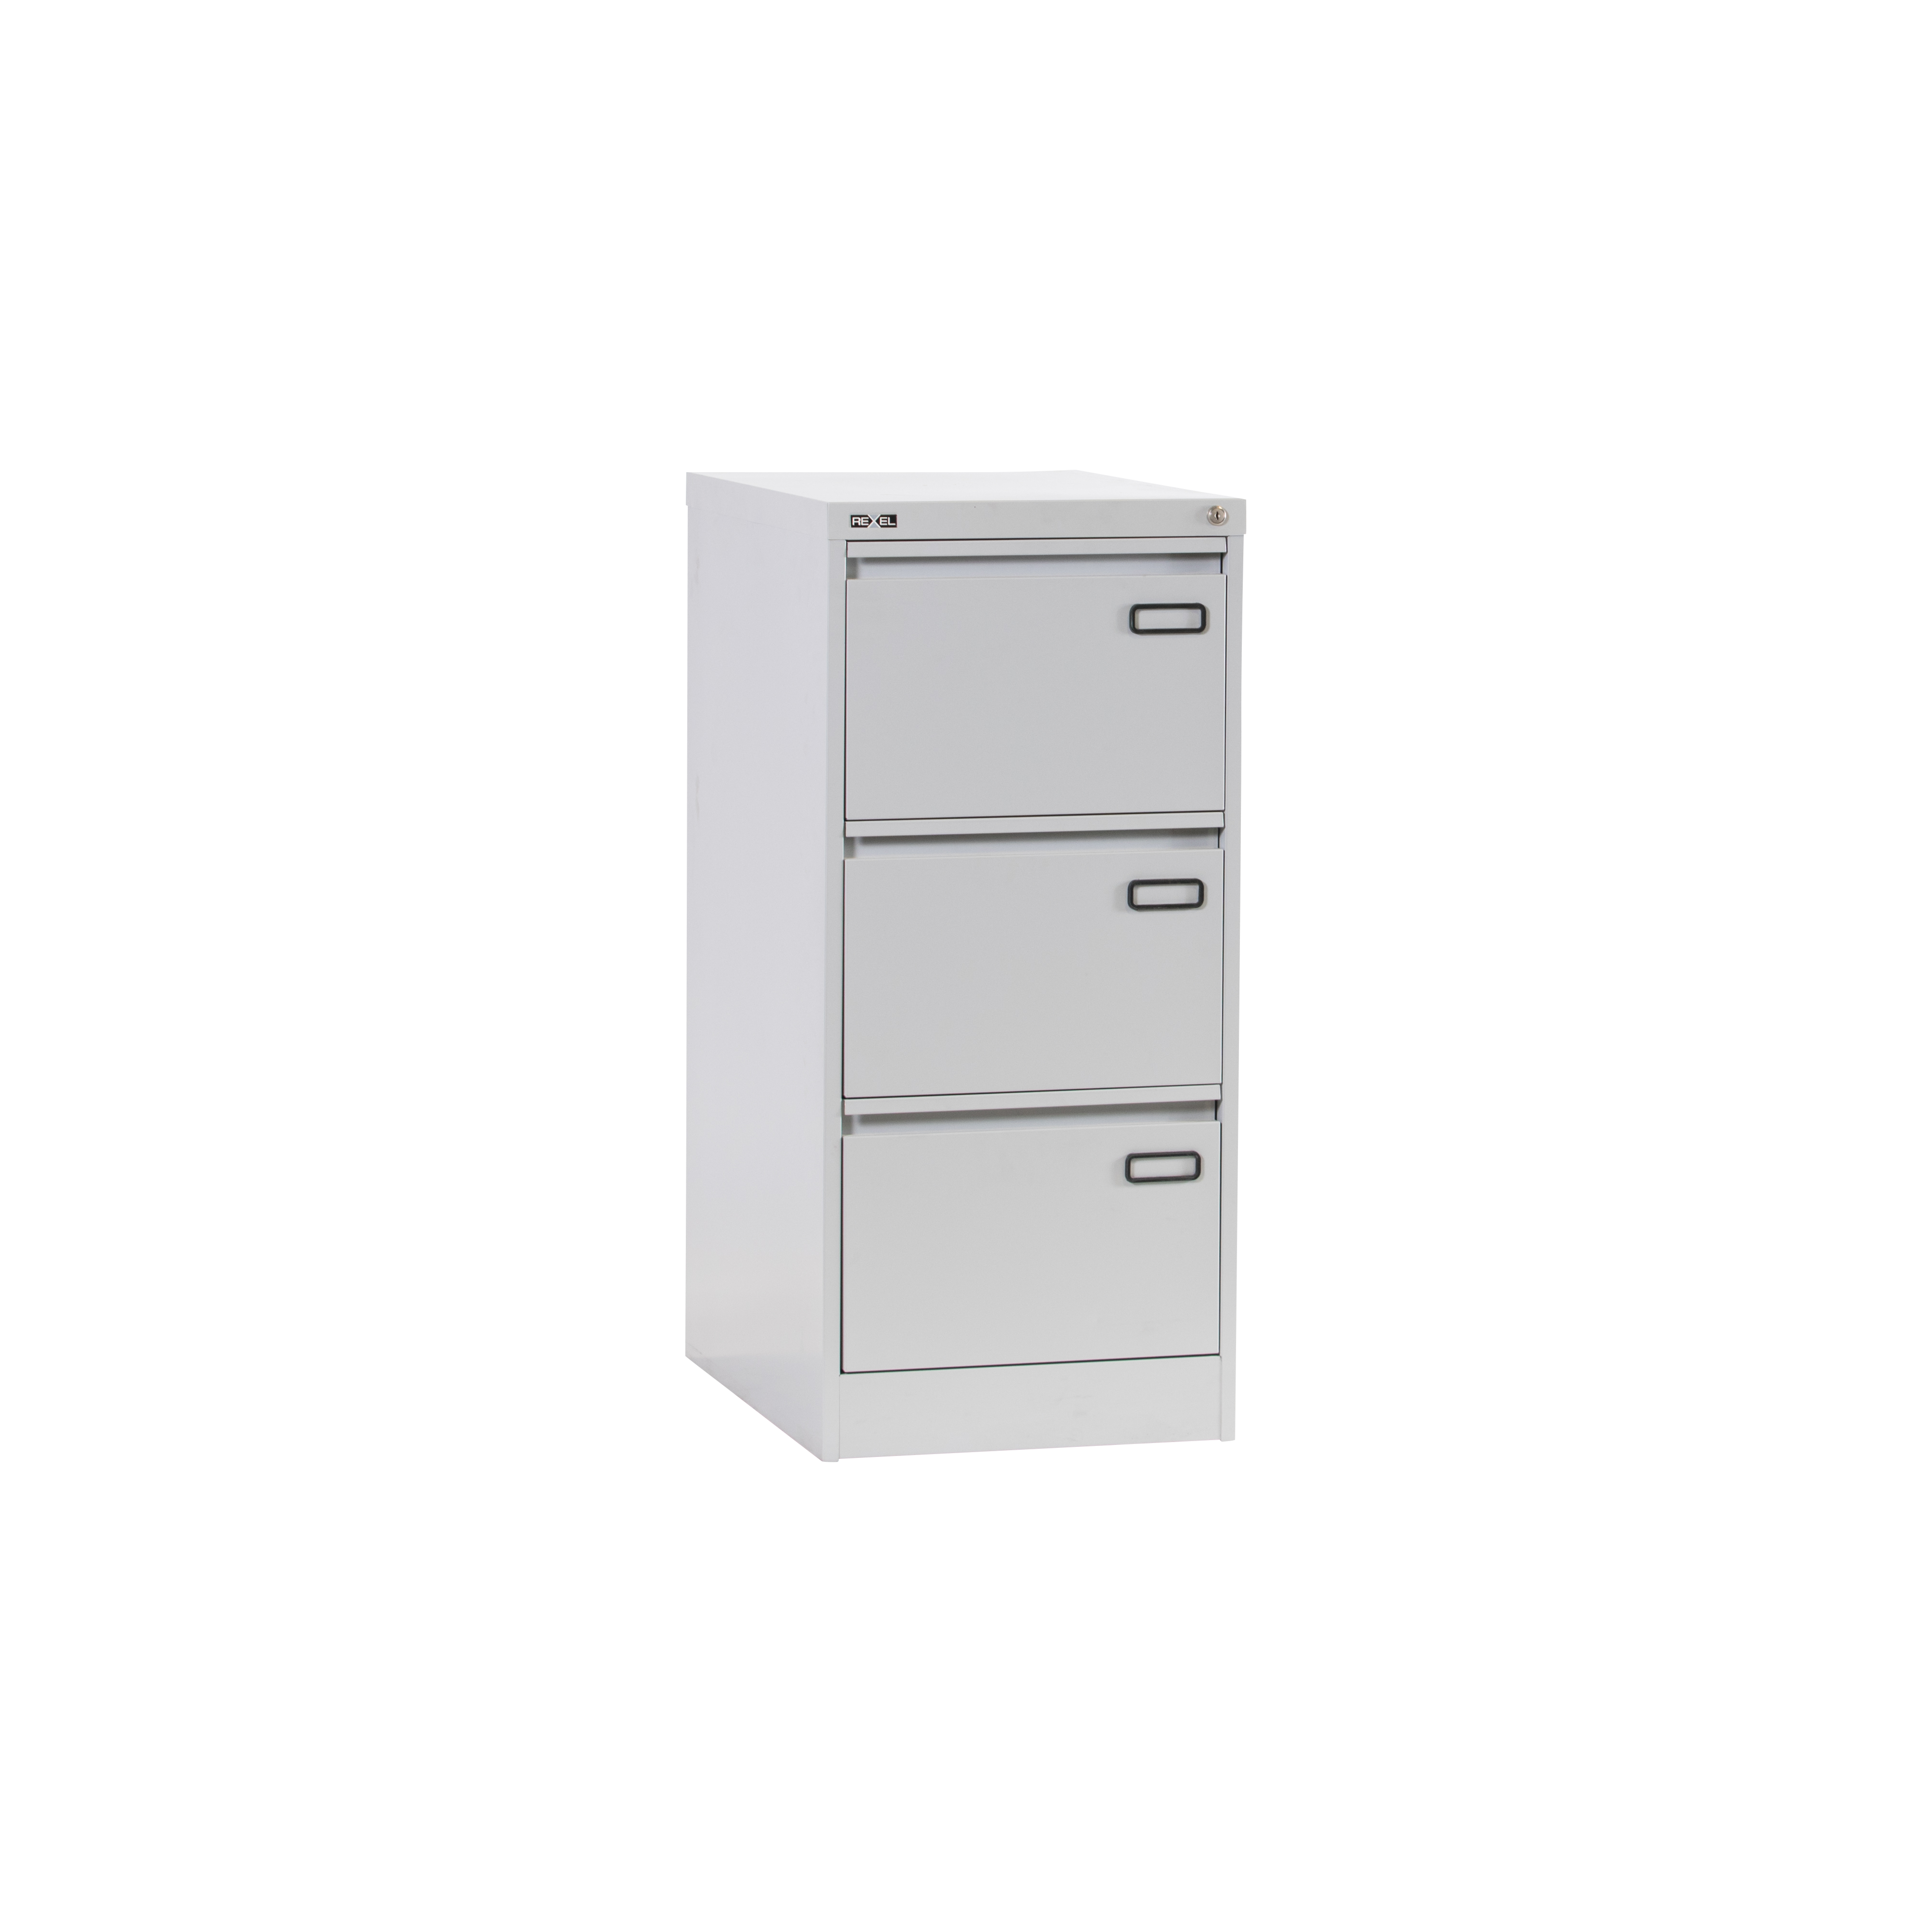 RXL303ST 3 Drawer Filing Cabinet